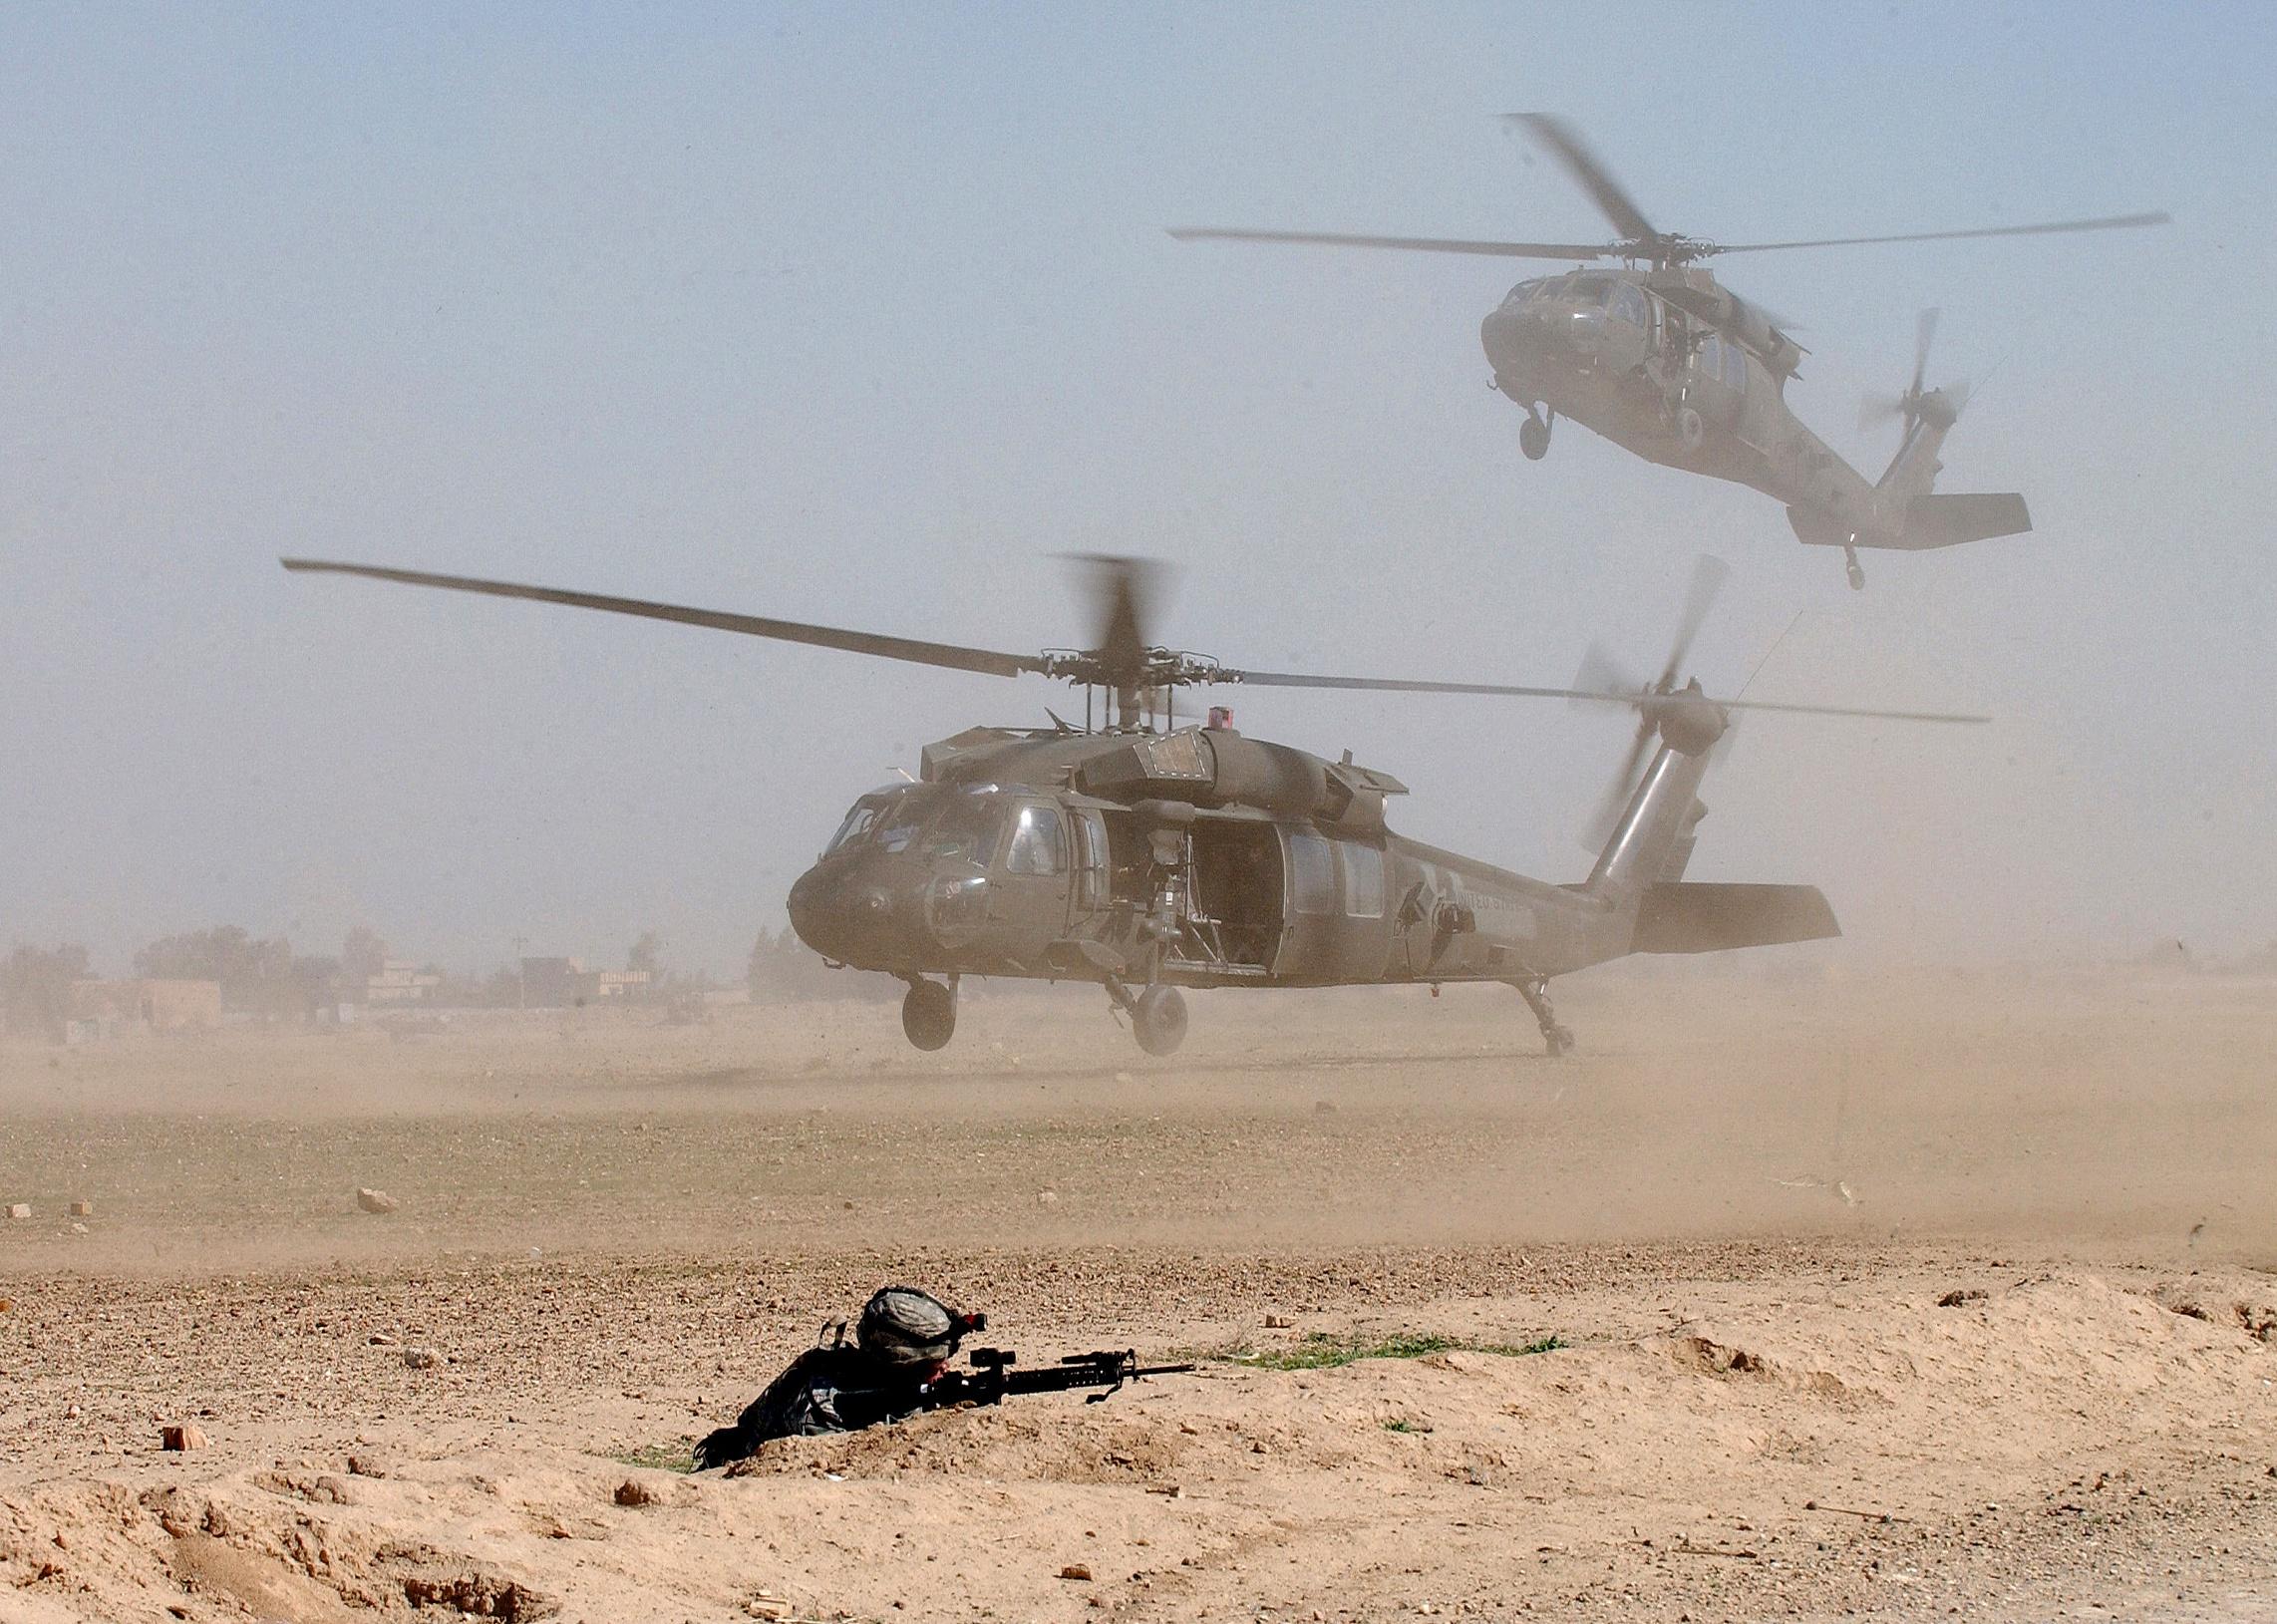 Blackhawk helicopters landing on the battlefield to pick up U.S. soldiers.